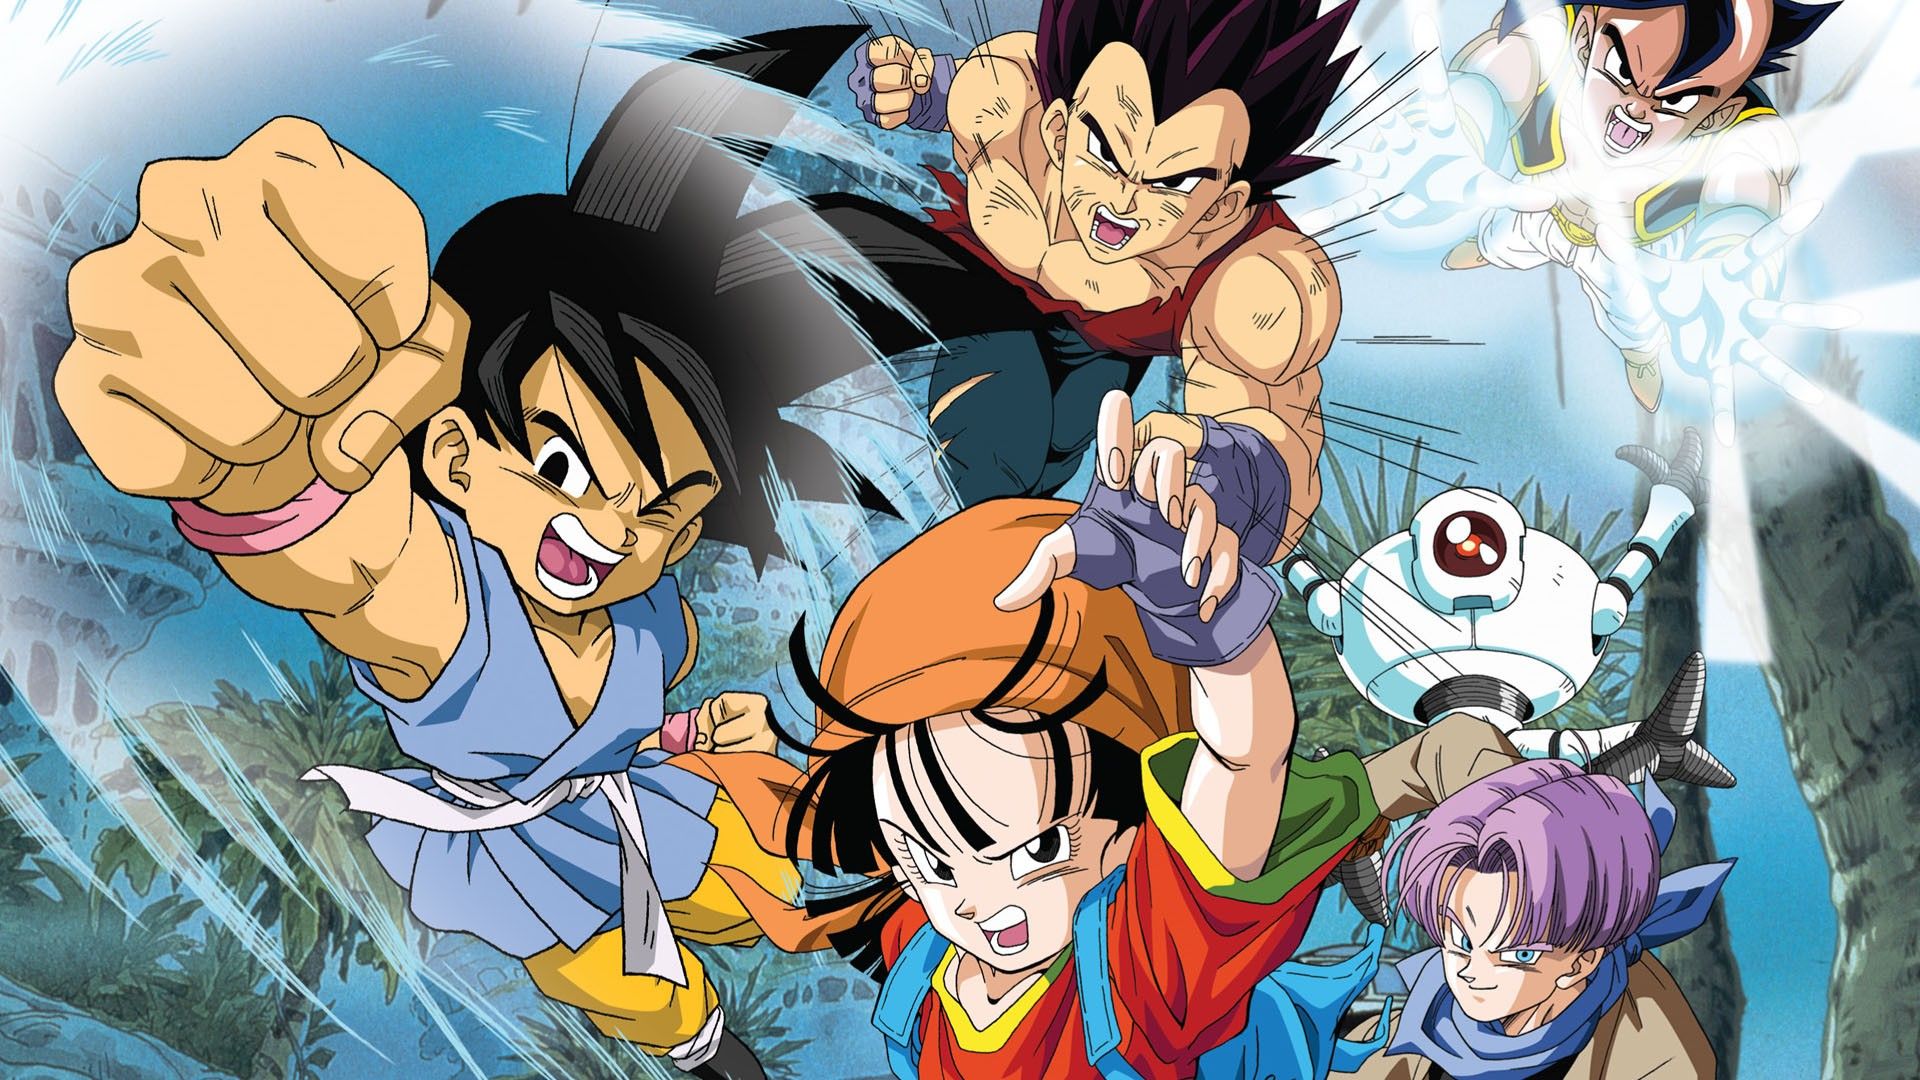 20 Crazy Things Only True Fans Know About Dragon Ball GT